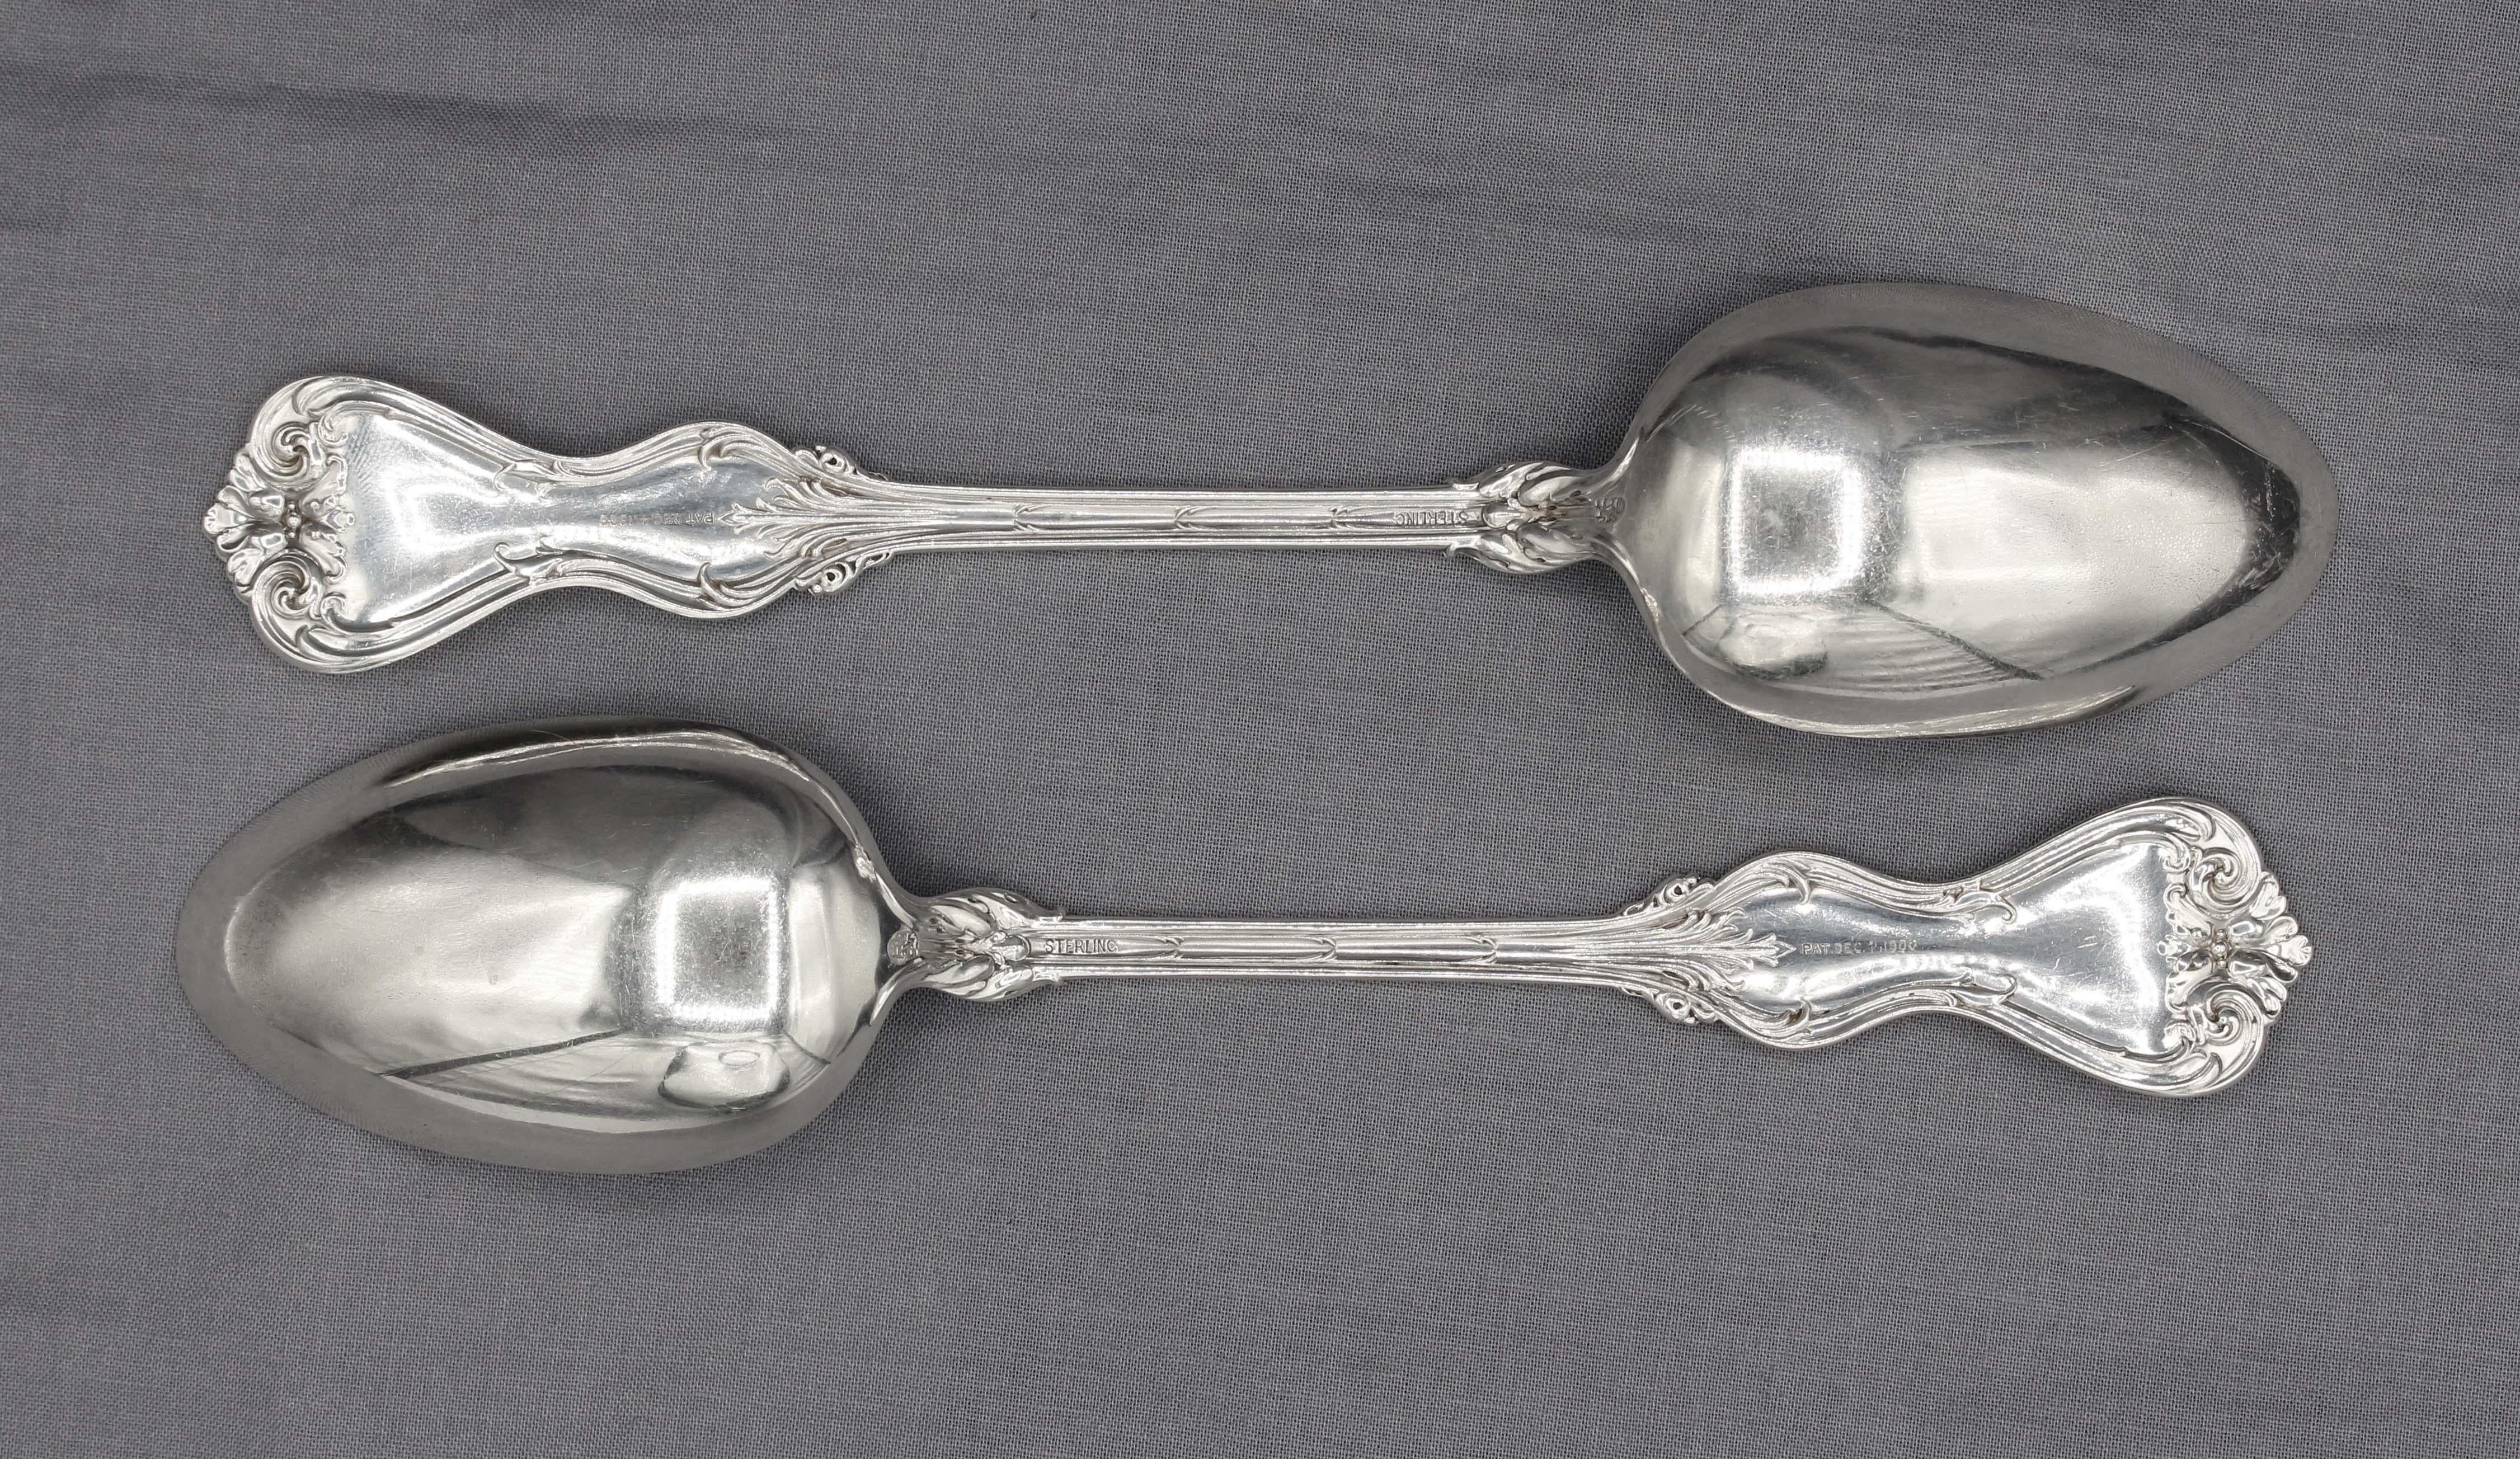 Antique pair of sterling silver tablespoons, Duke of York pattern by Gorham. Pattern patented Dec. 1, 1900. Period monogram, 